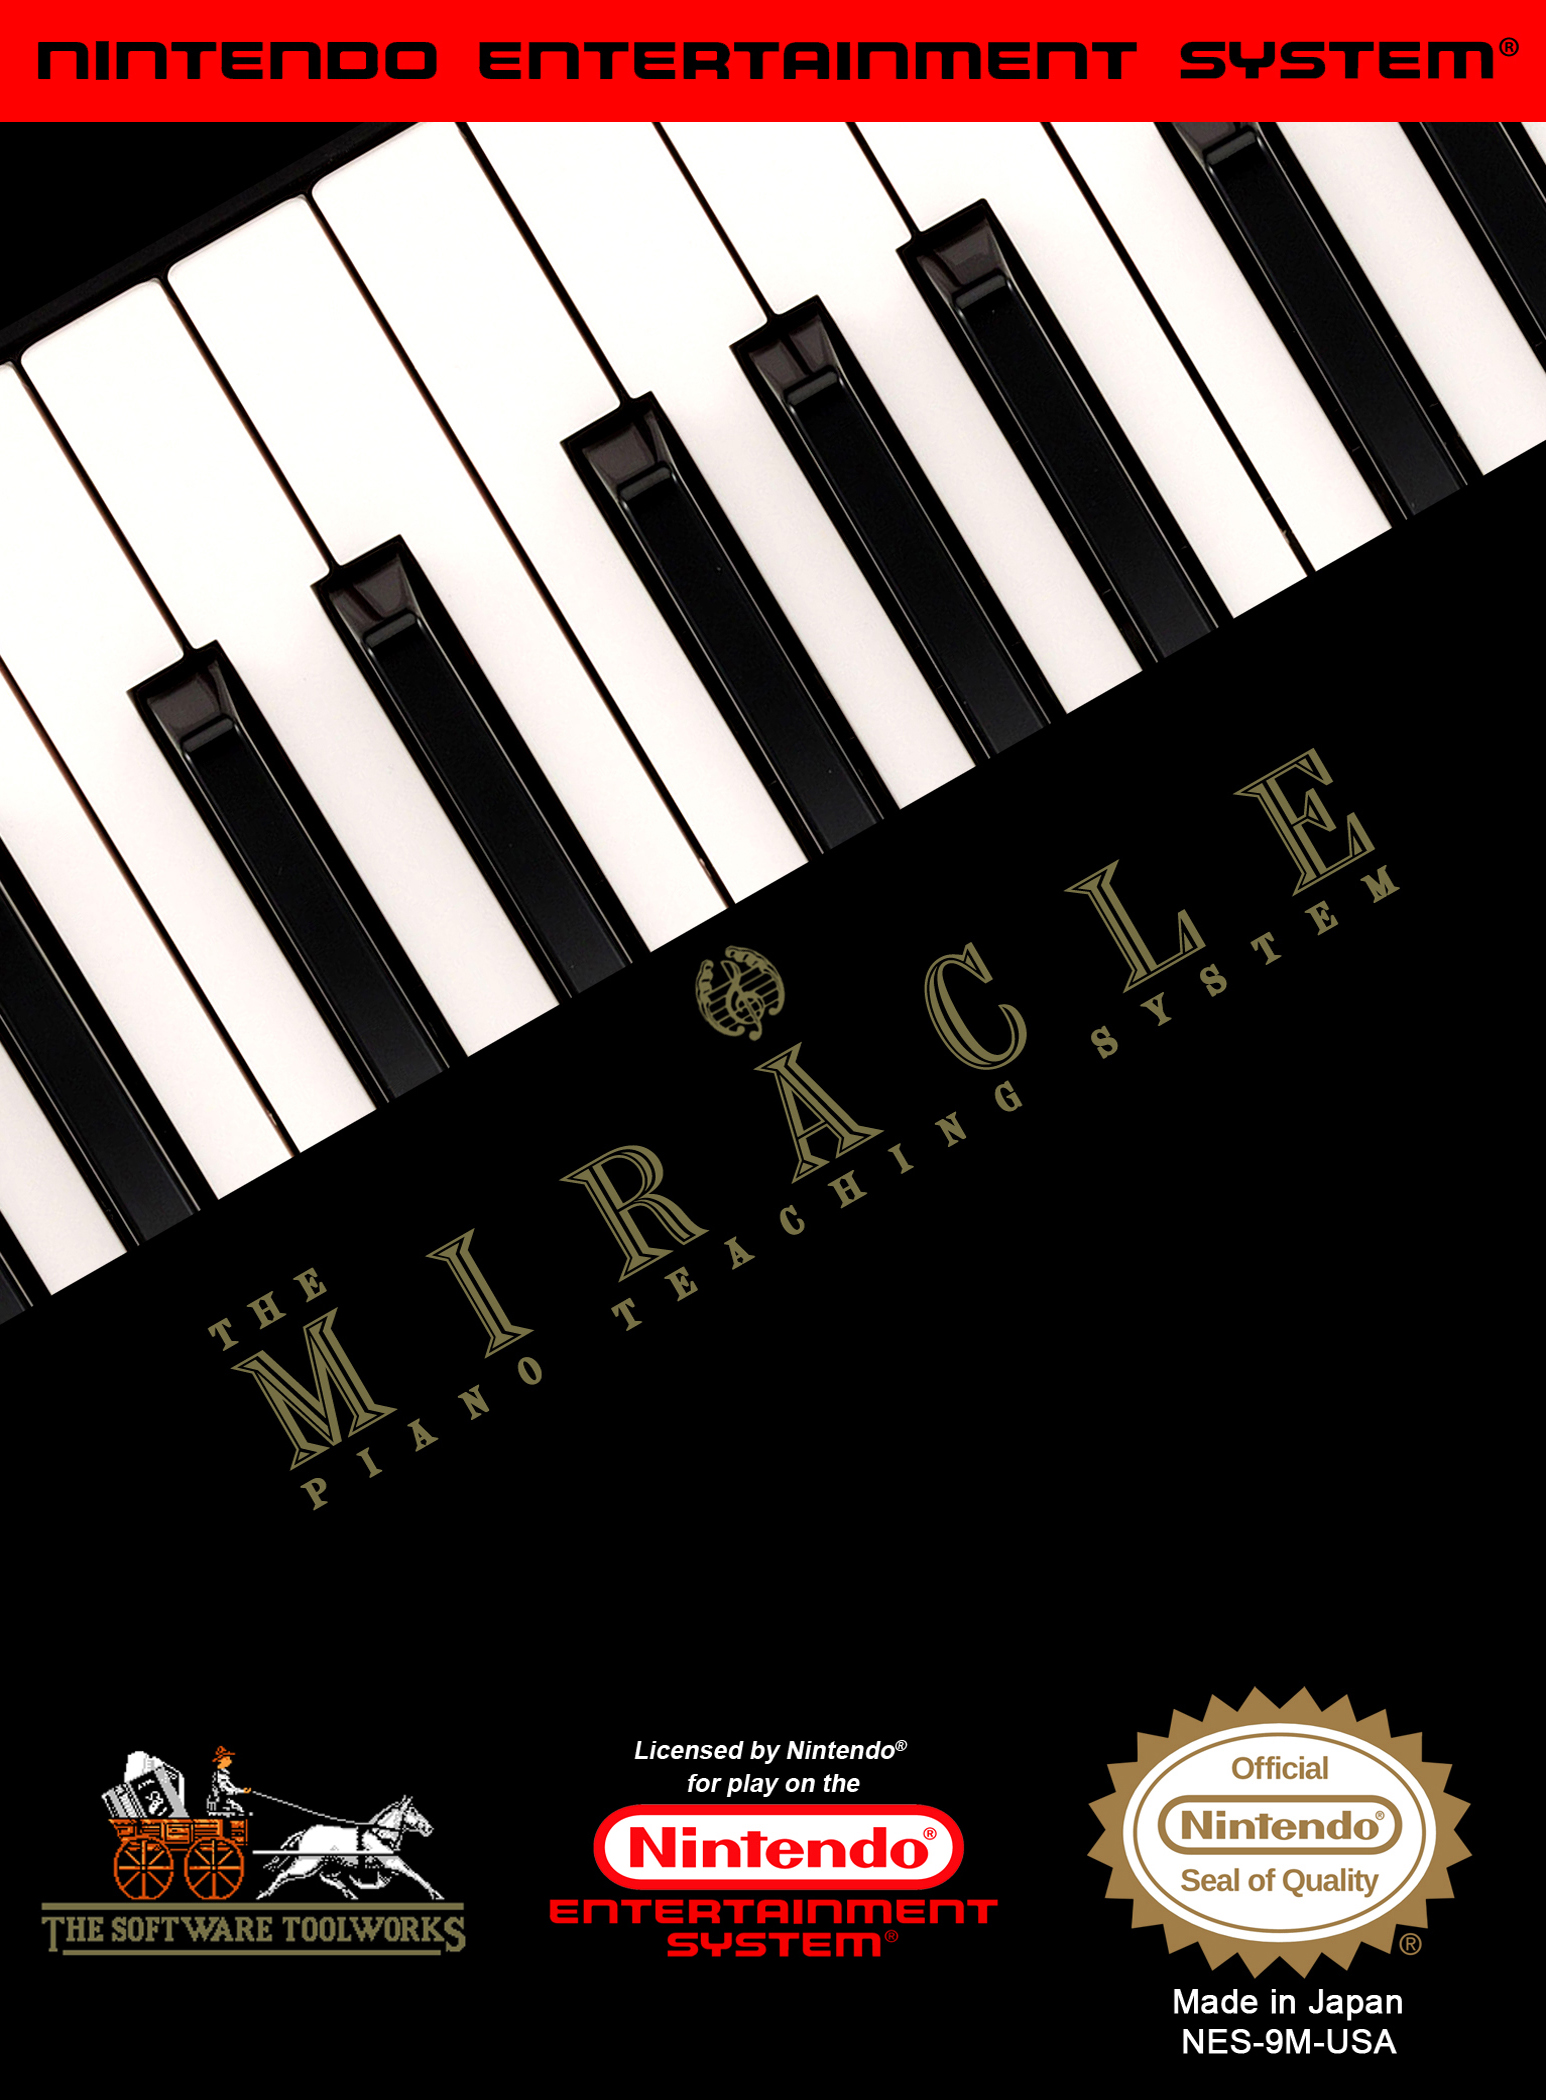 the miracle piano teaching system amiga version